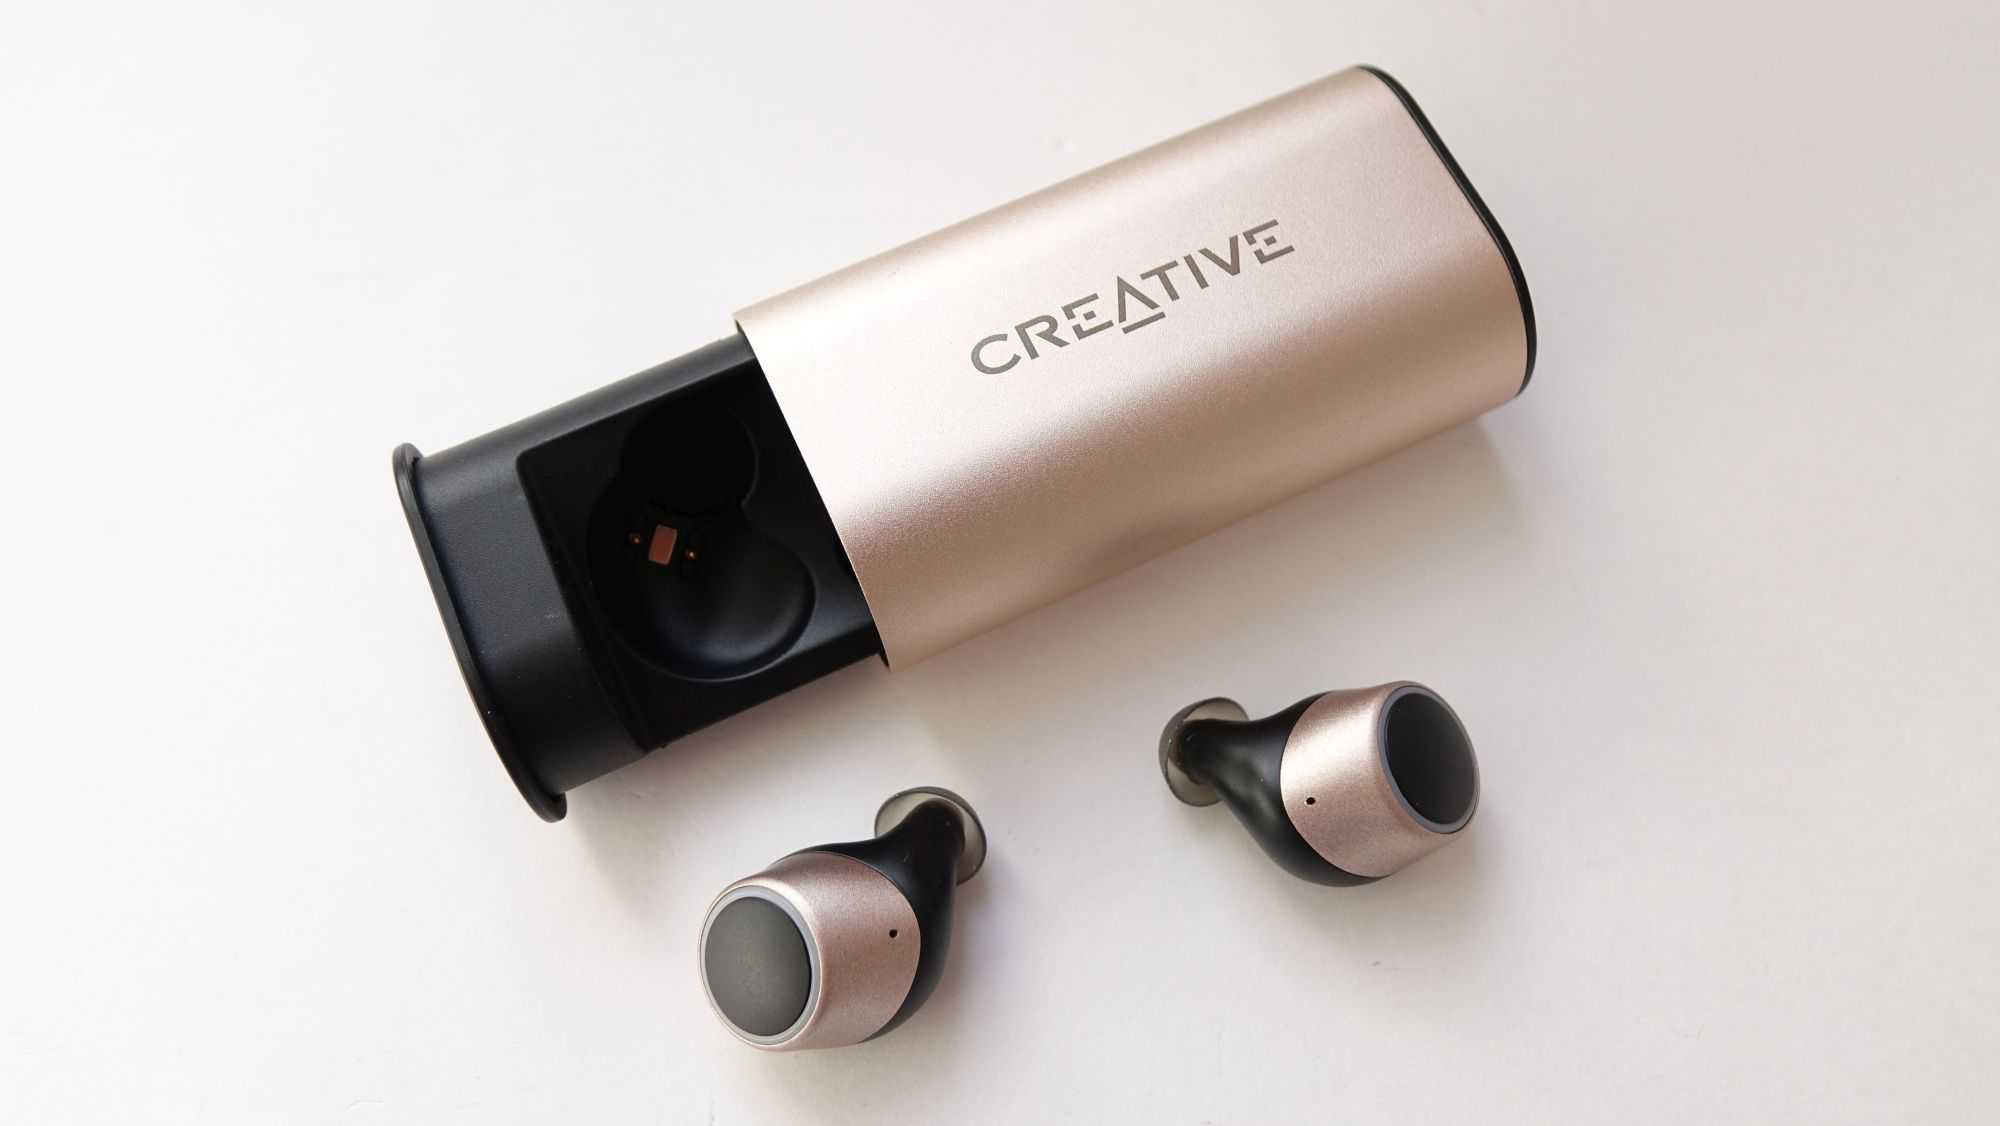 Creative outlier gold: true wireless earbuds with killer battery life